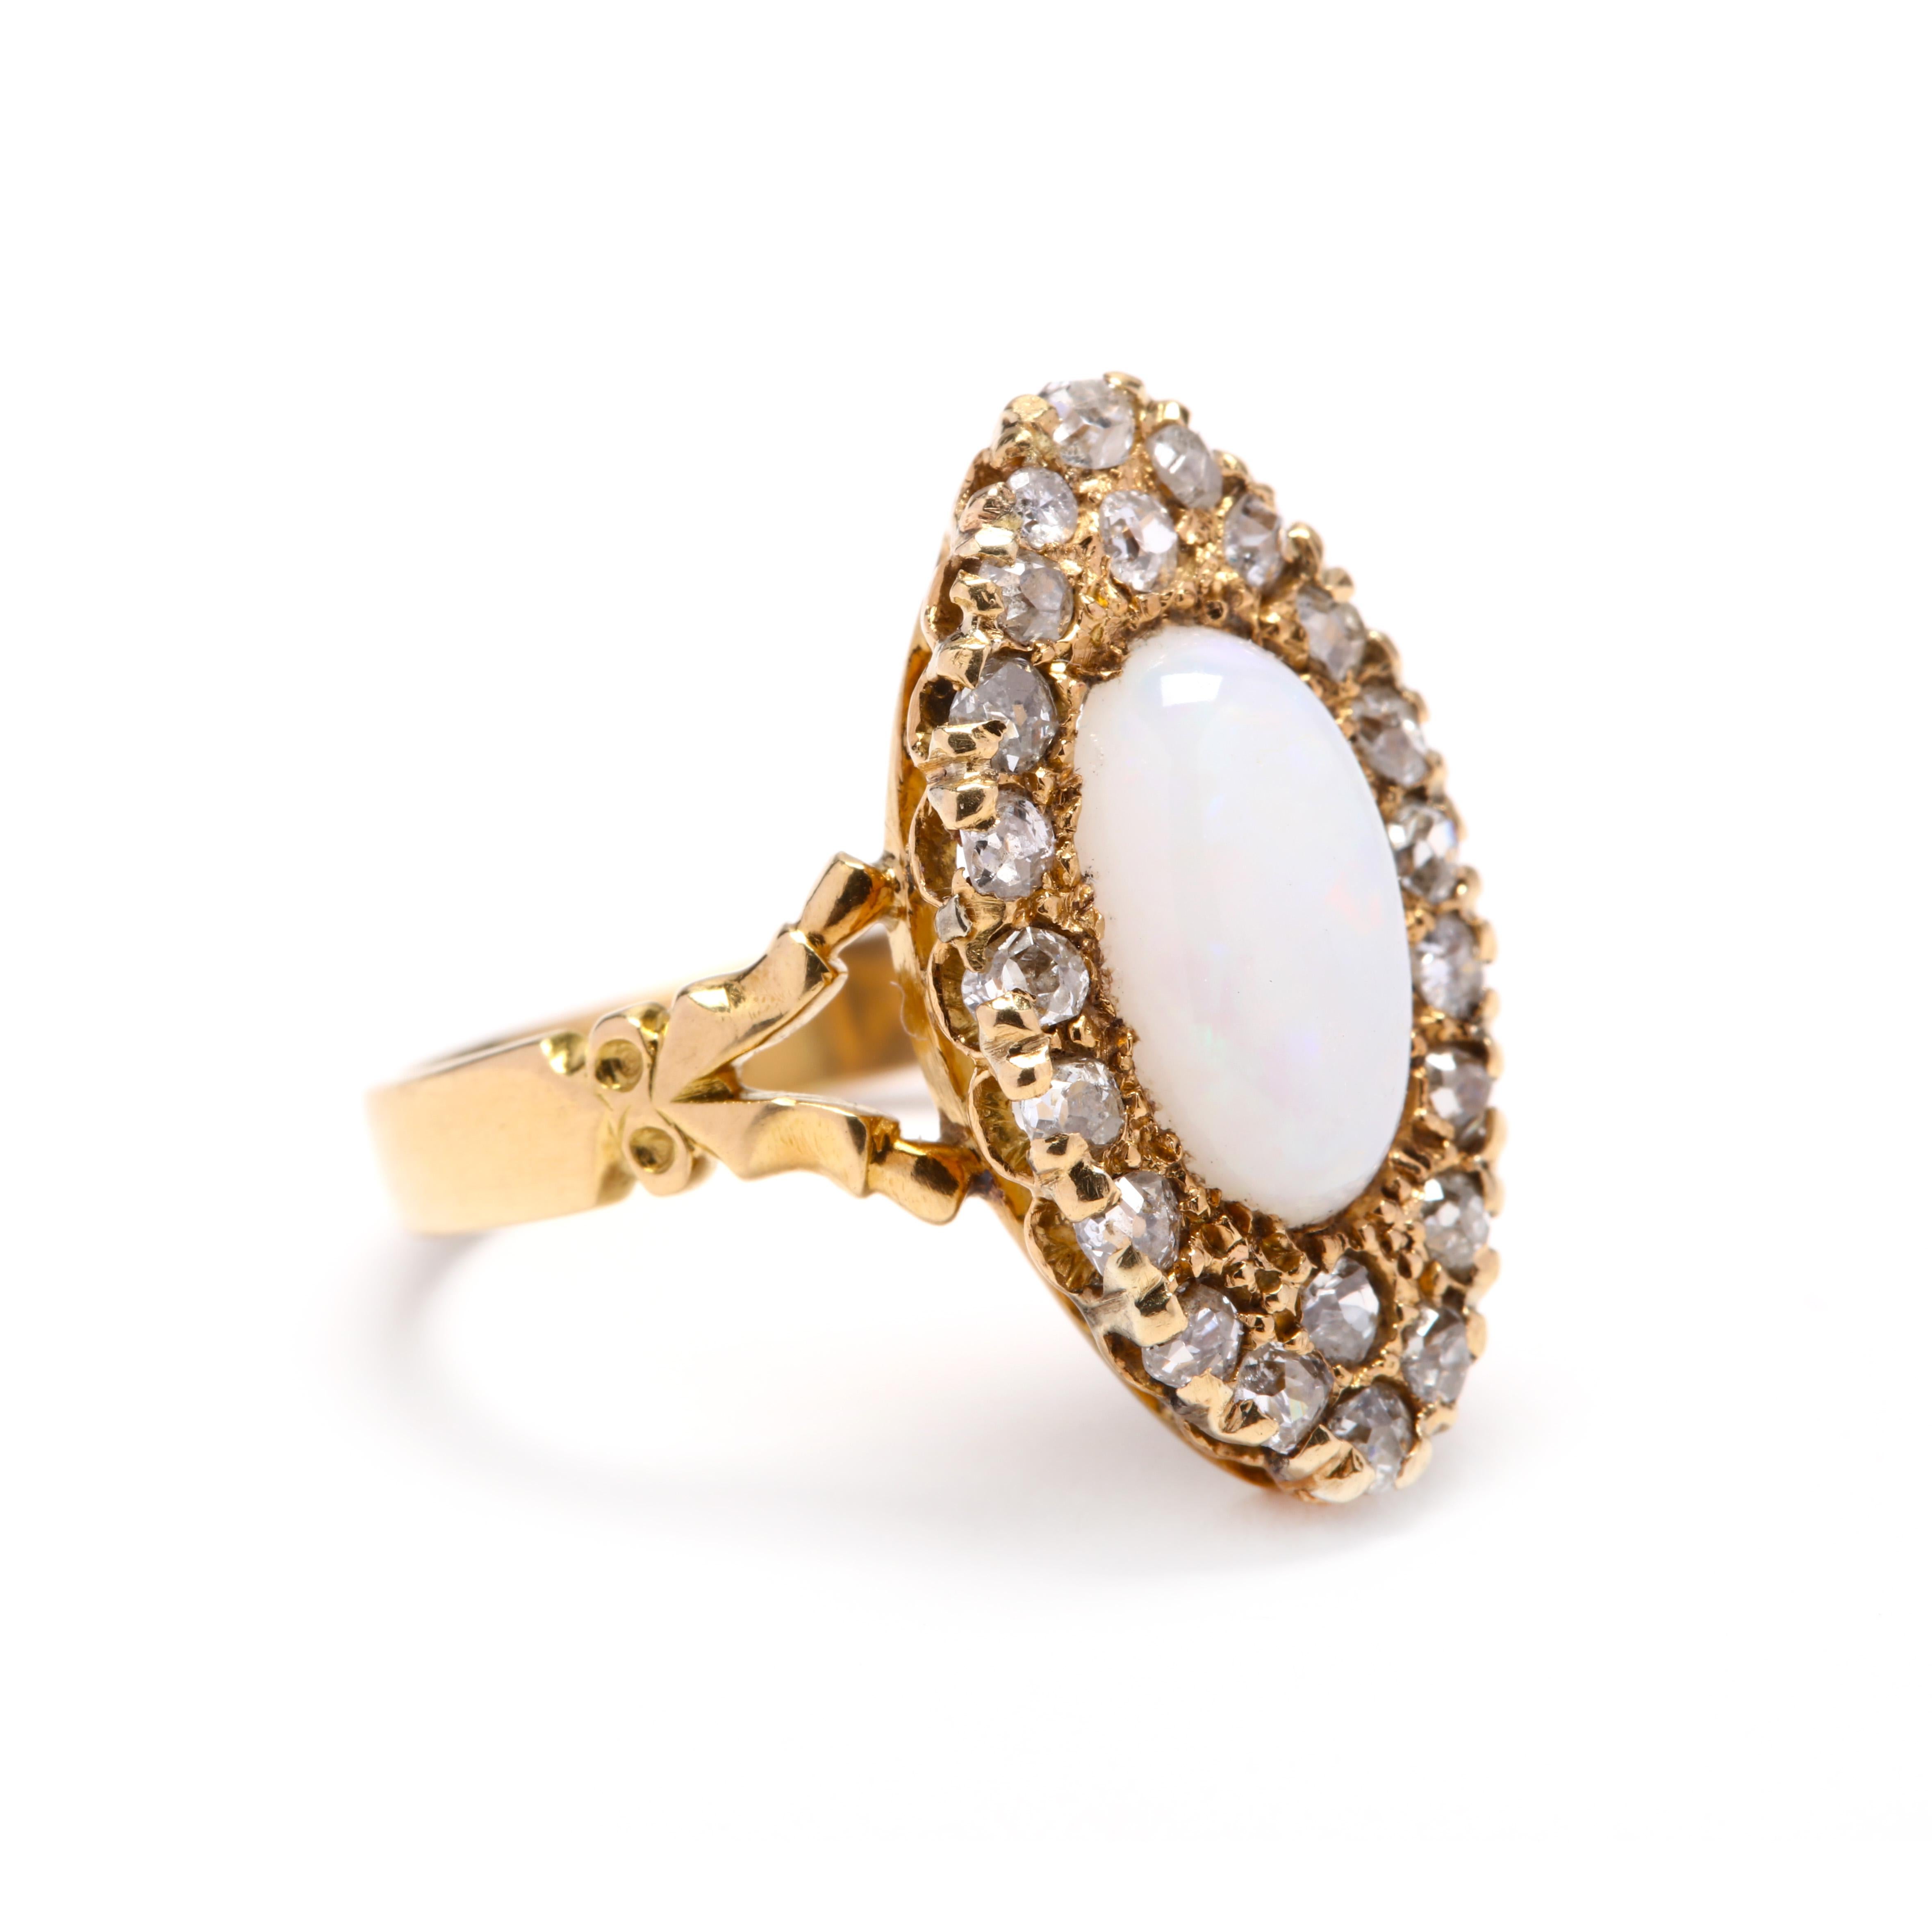 Victorian 18 karat gold navette ring centered on an oval, cabochon opal weighing approximately 1.64 carats, surrounded by old rose cut diamonds weighing approximately .66 total carats (I - L color, VS-SI clarity), with a split shank and with British